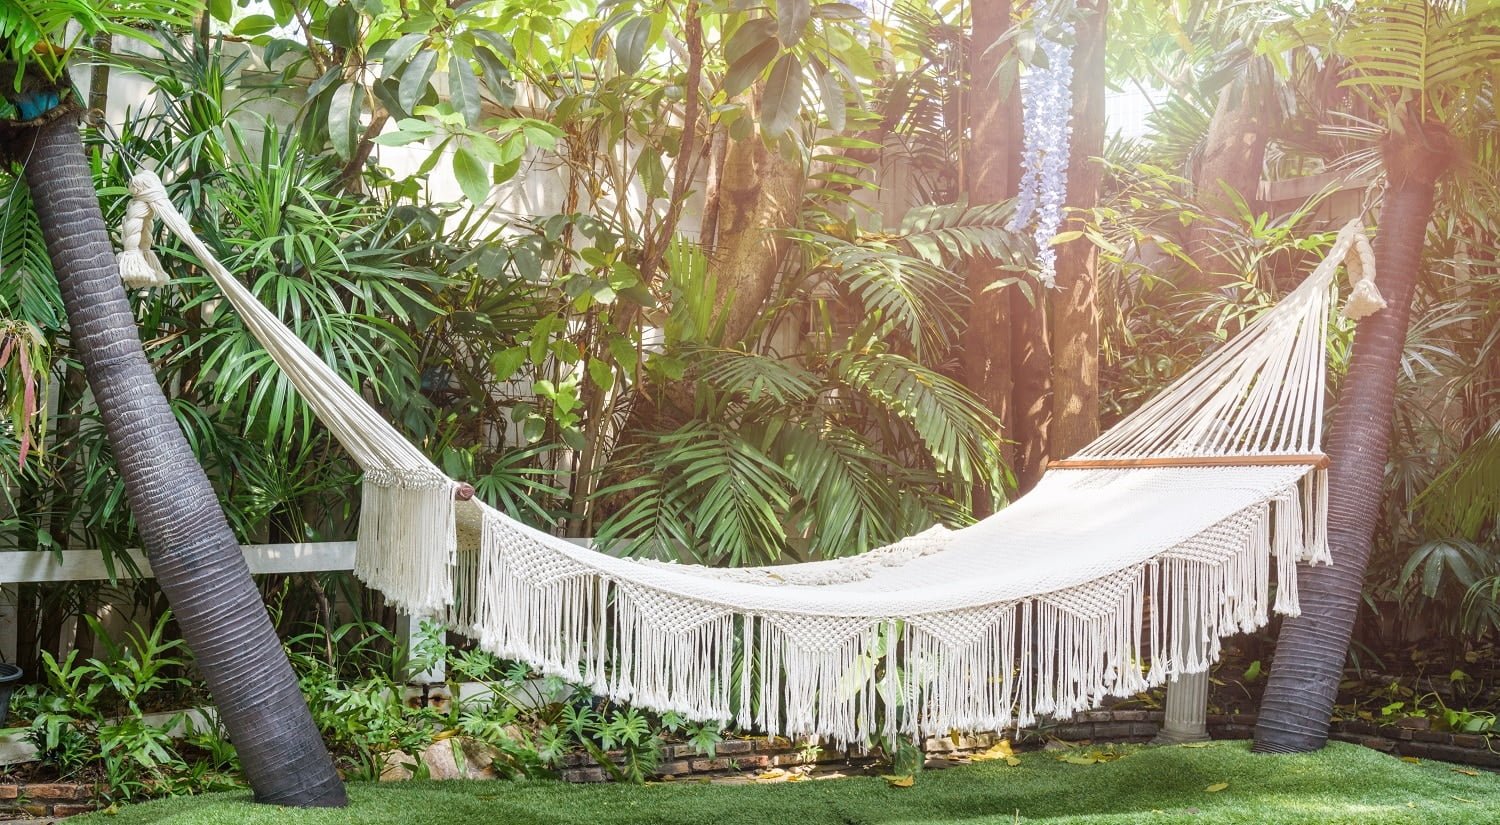 Empty white hammock hanging between palm trees on the garden for recreation or relaxation on summer day